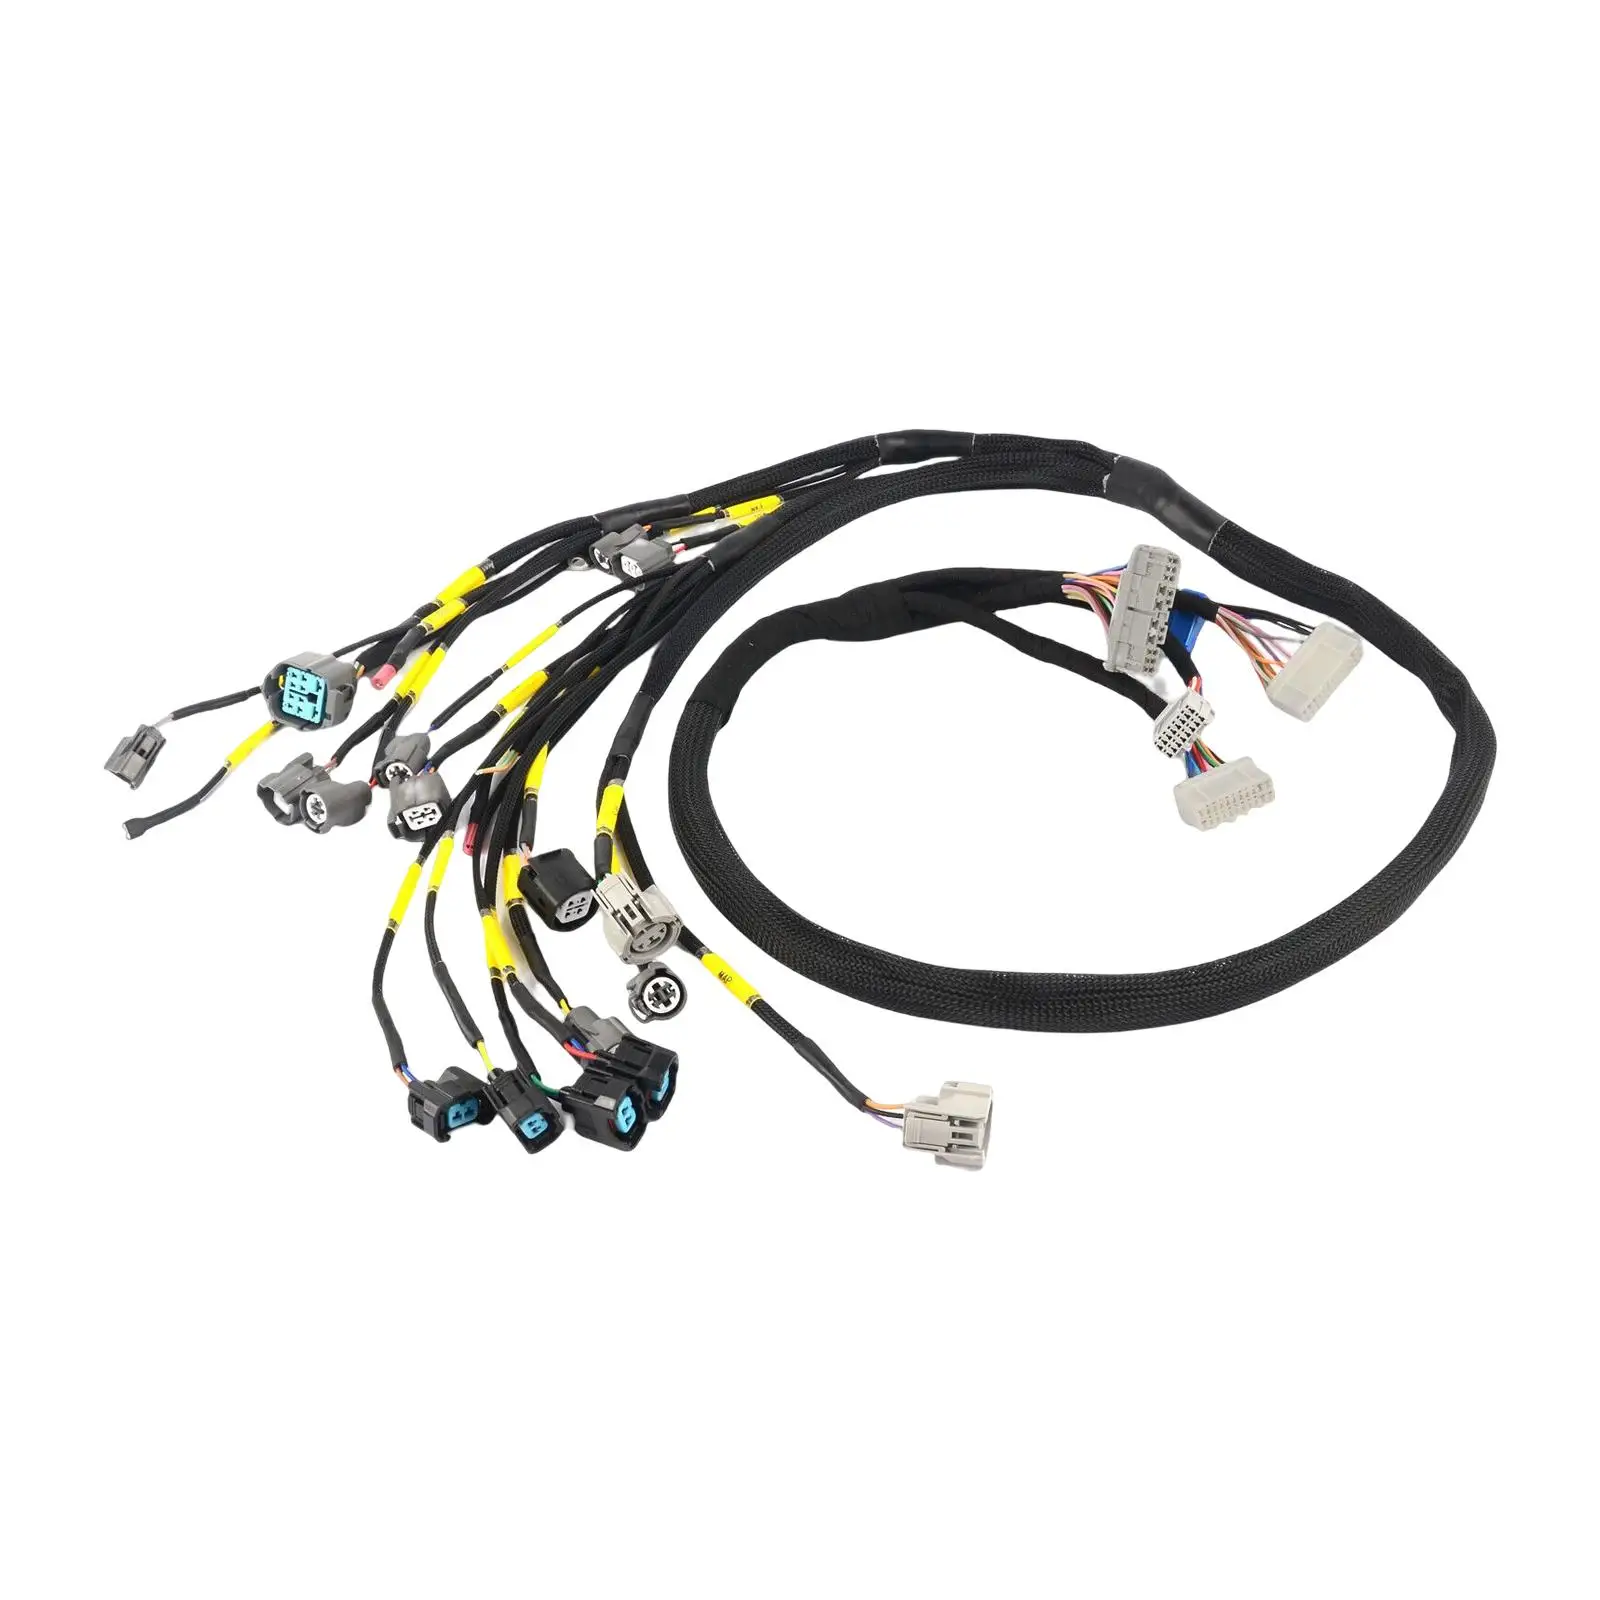 Tucked Engine Harness Cnch-Obd2-1 Replaces Accessories Automobile Professional